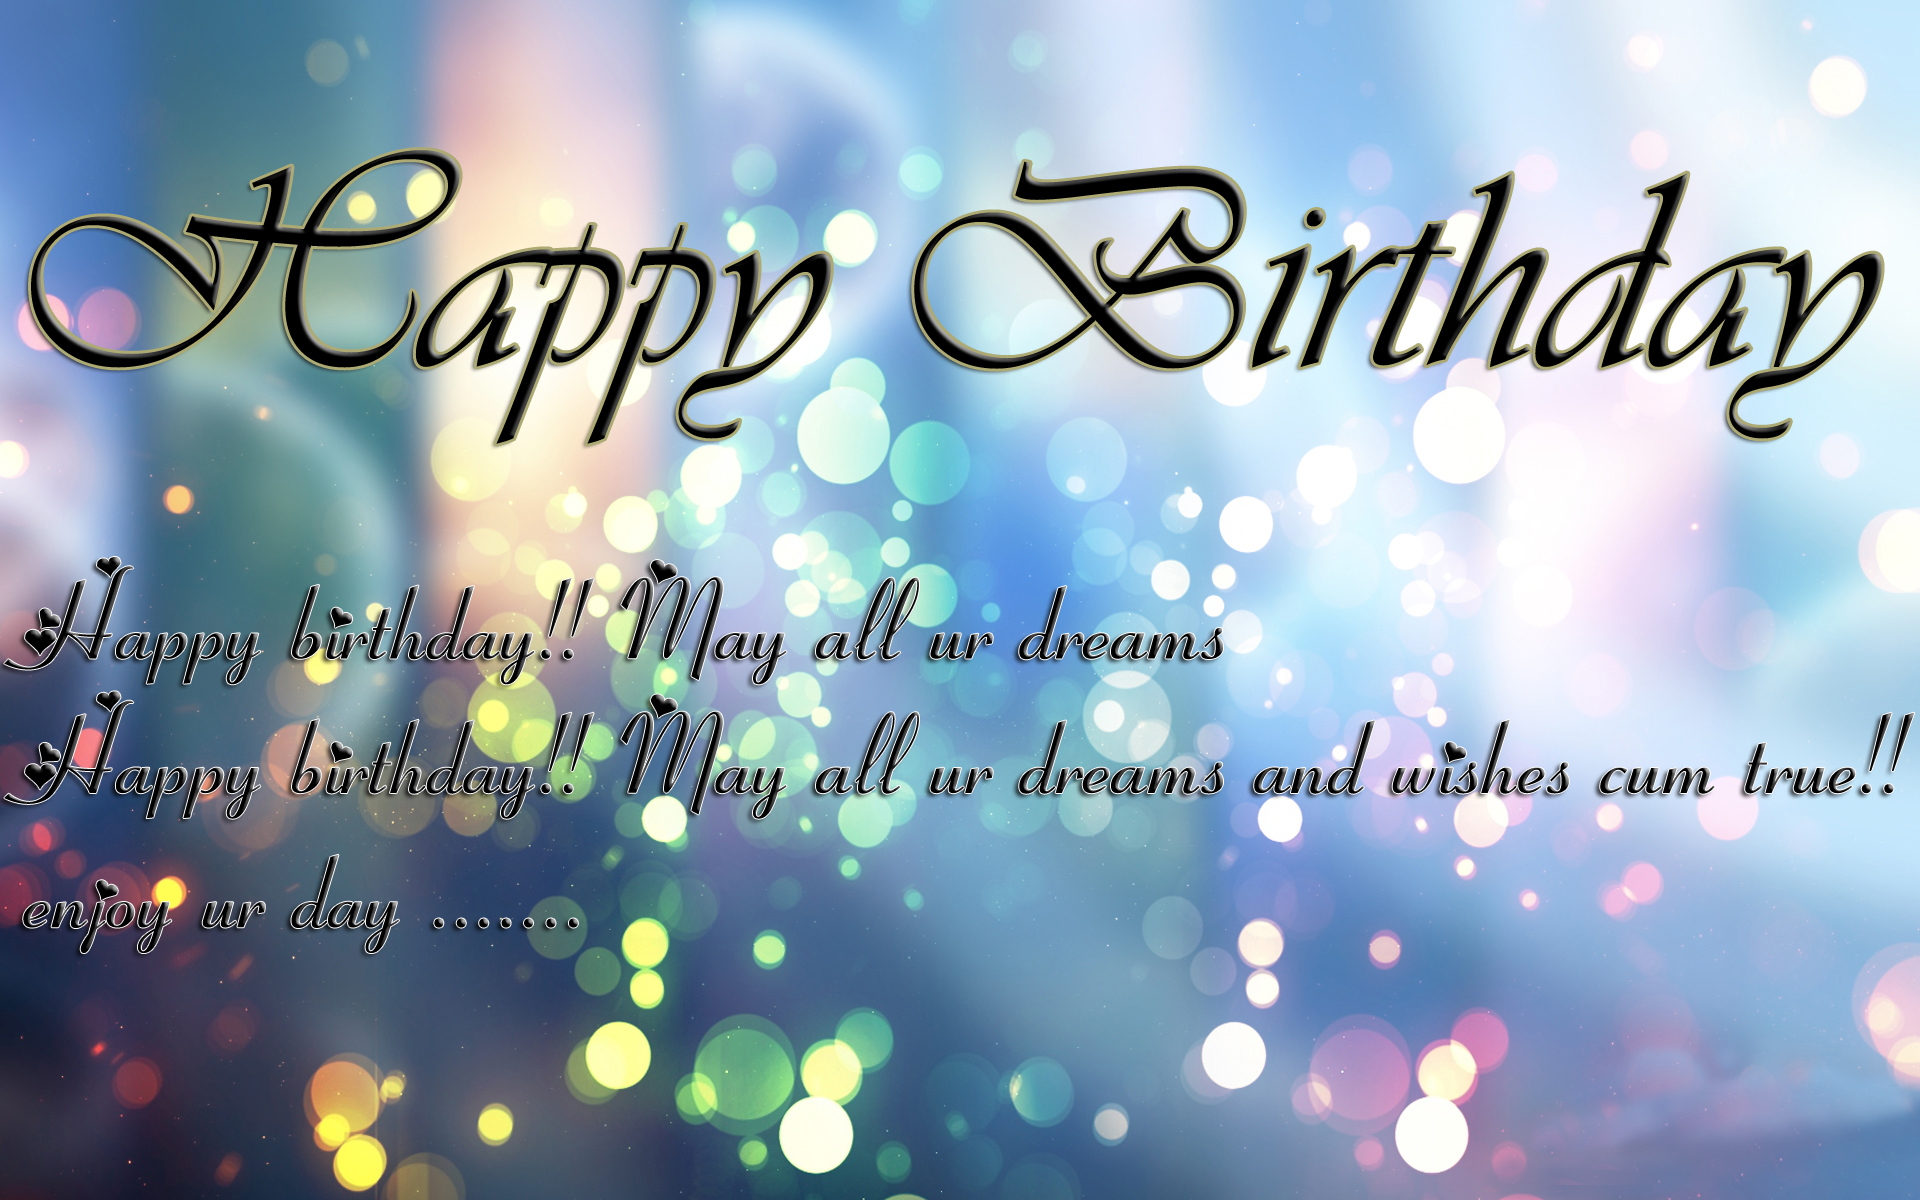 birthday greeting sms wallpaper download Daily pics update HD 1920x1200